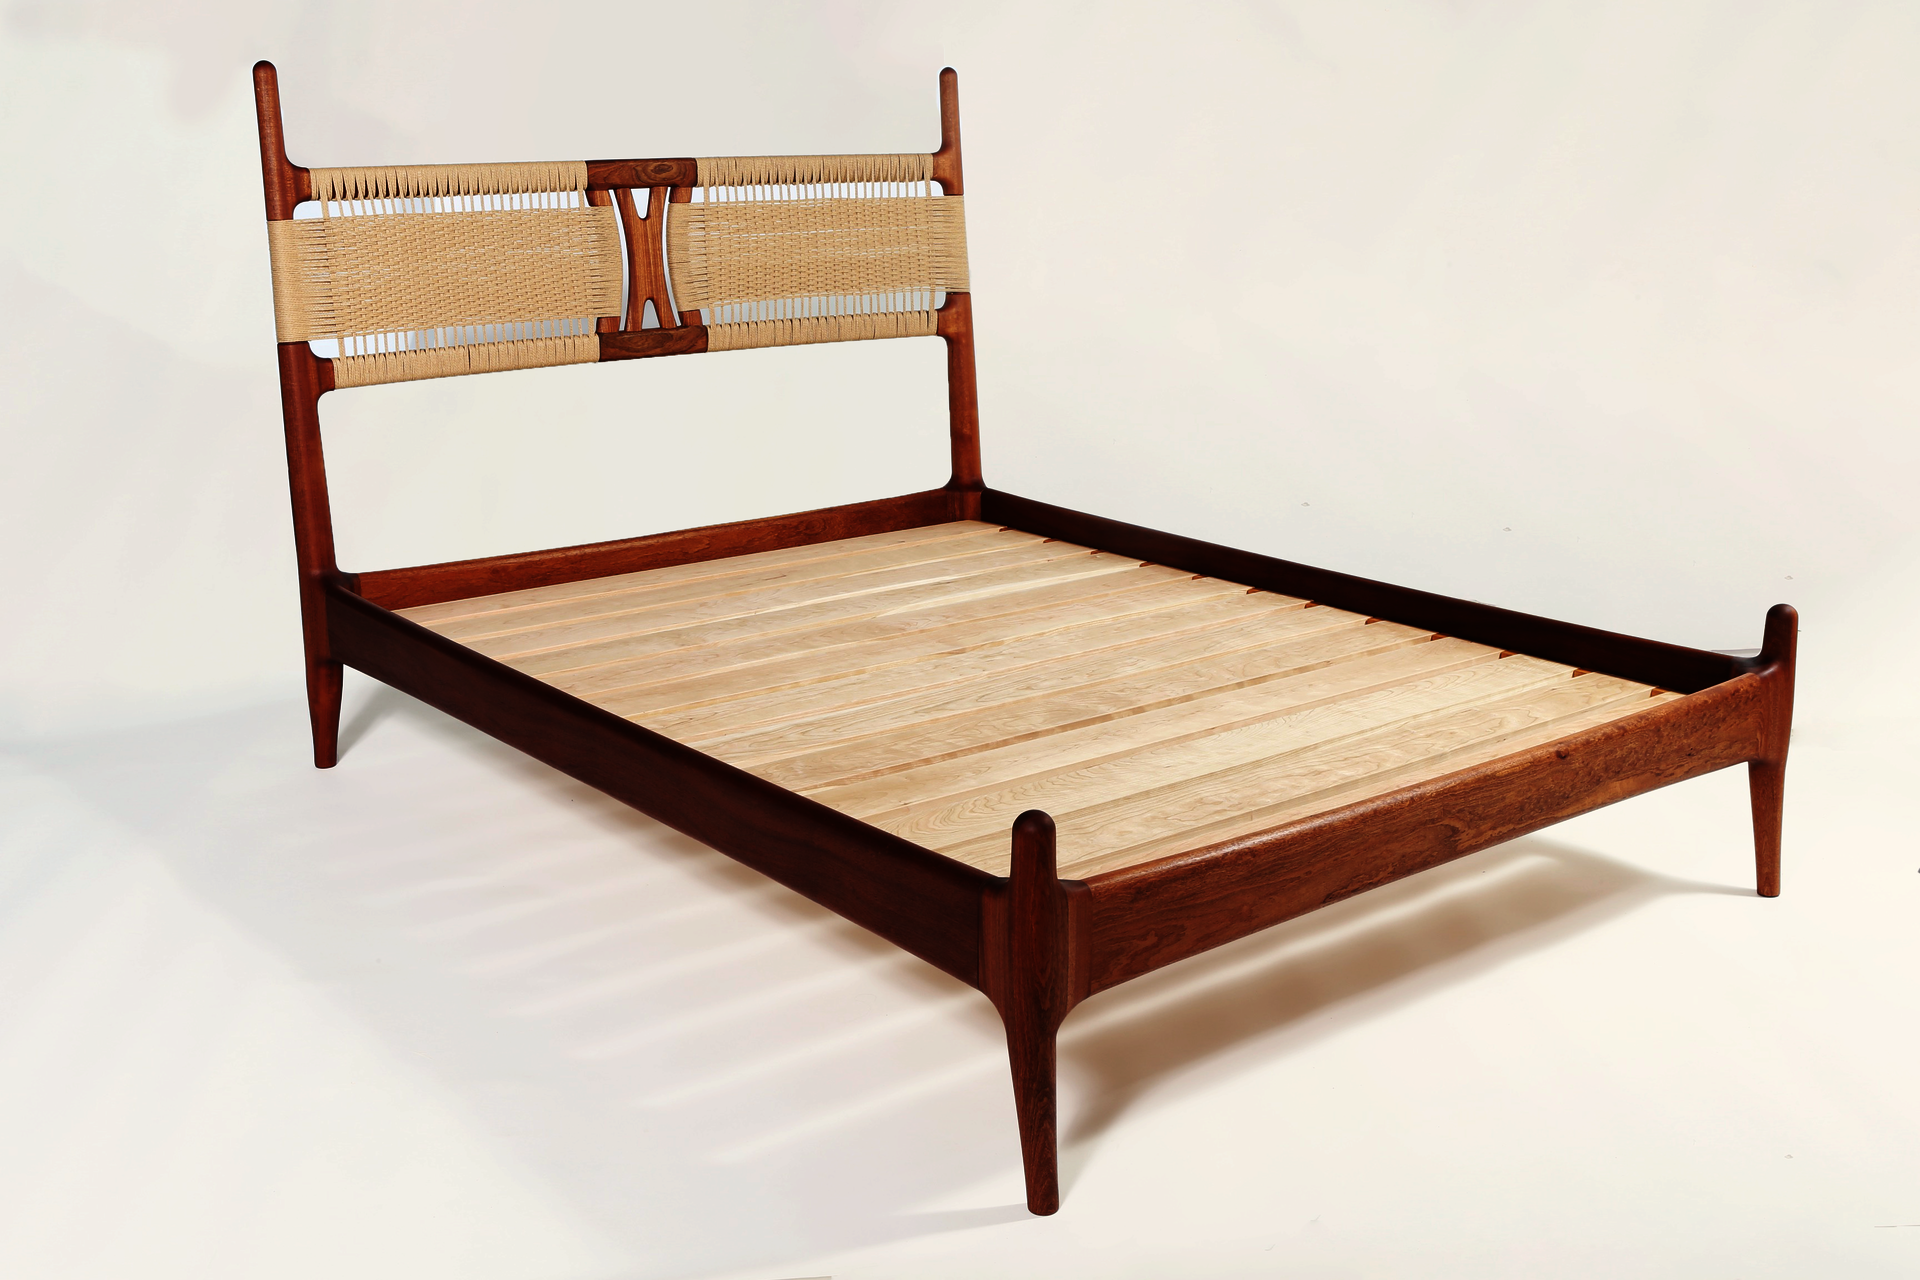 Sapele wood bed frame with woven papercord headboard on white background